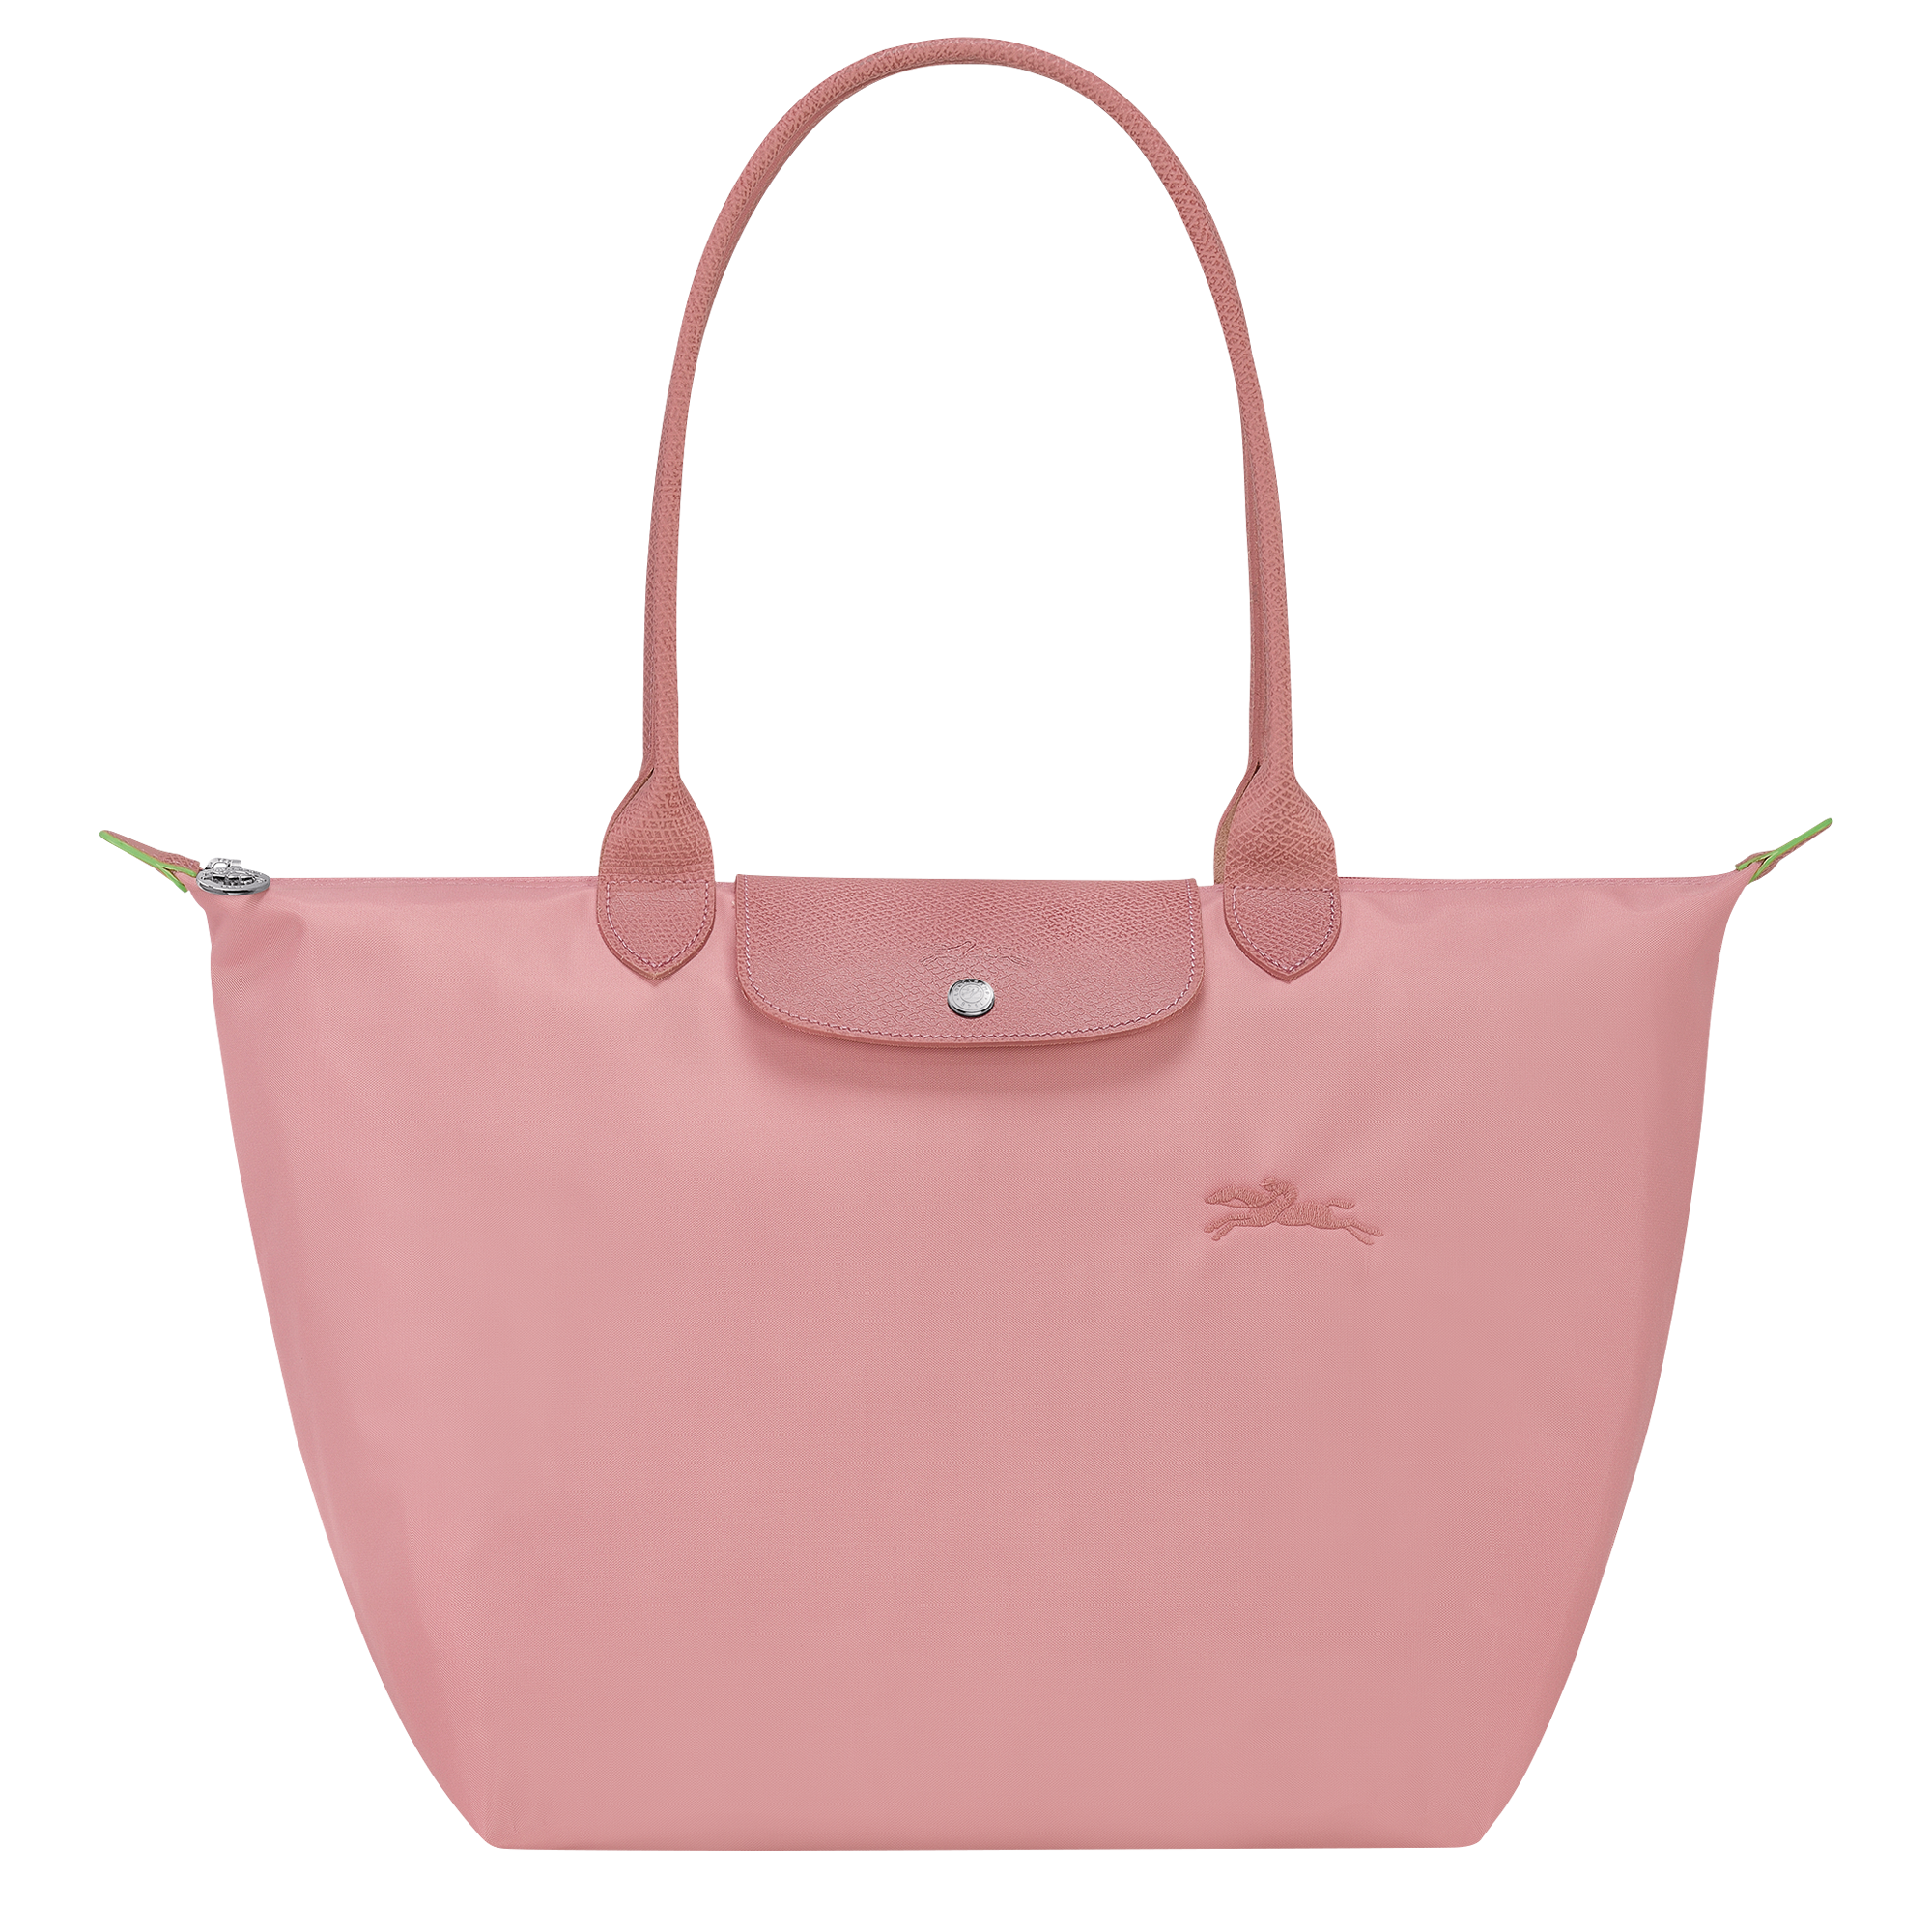 Longchamp Tote Bag Review: Why This Tote Has a Cult Following